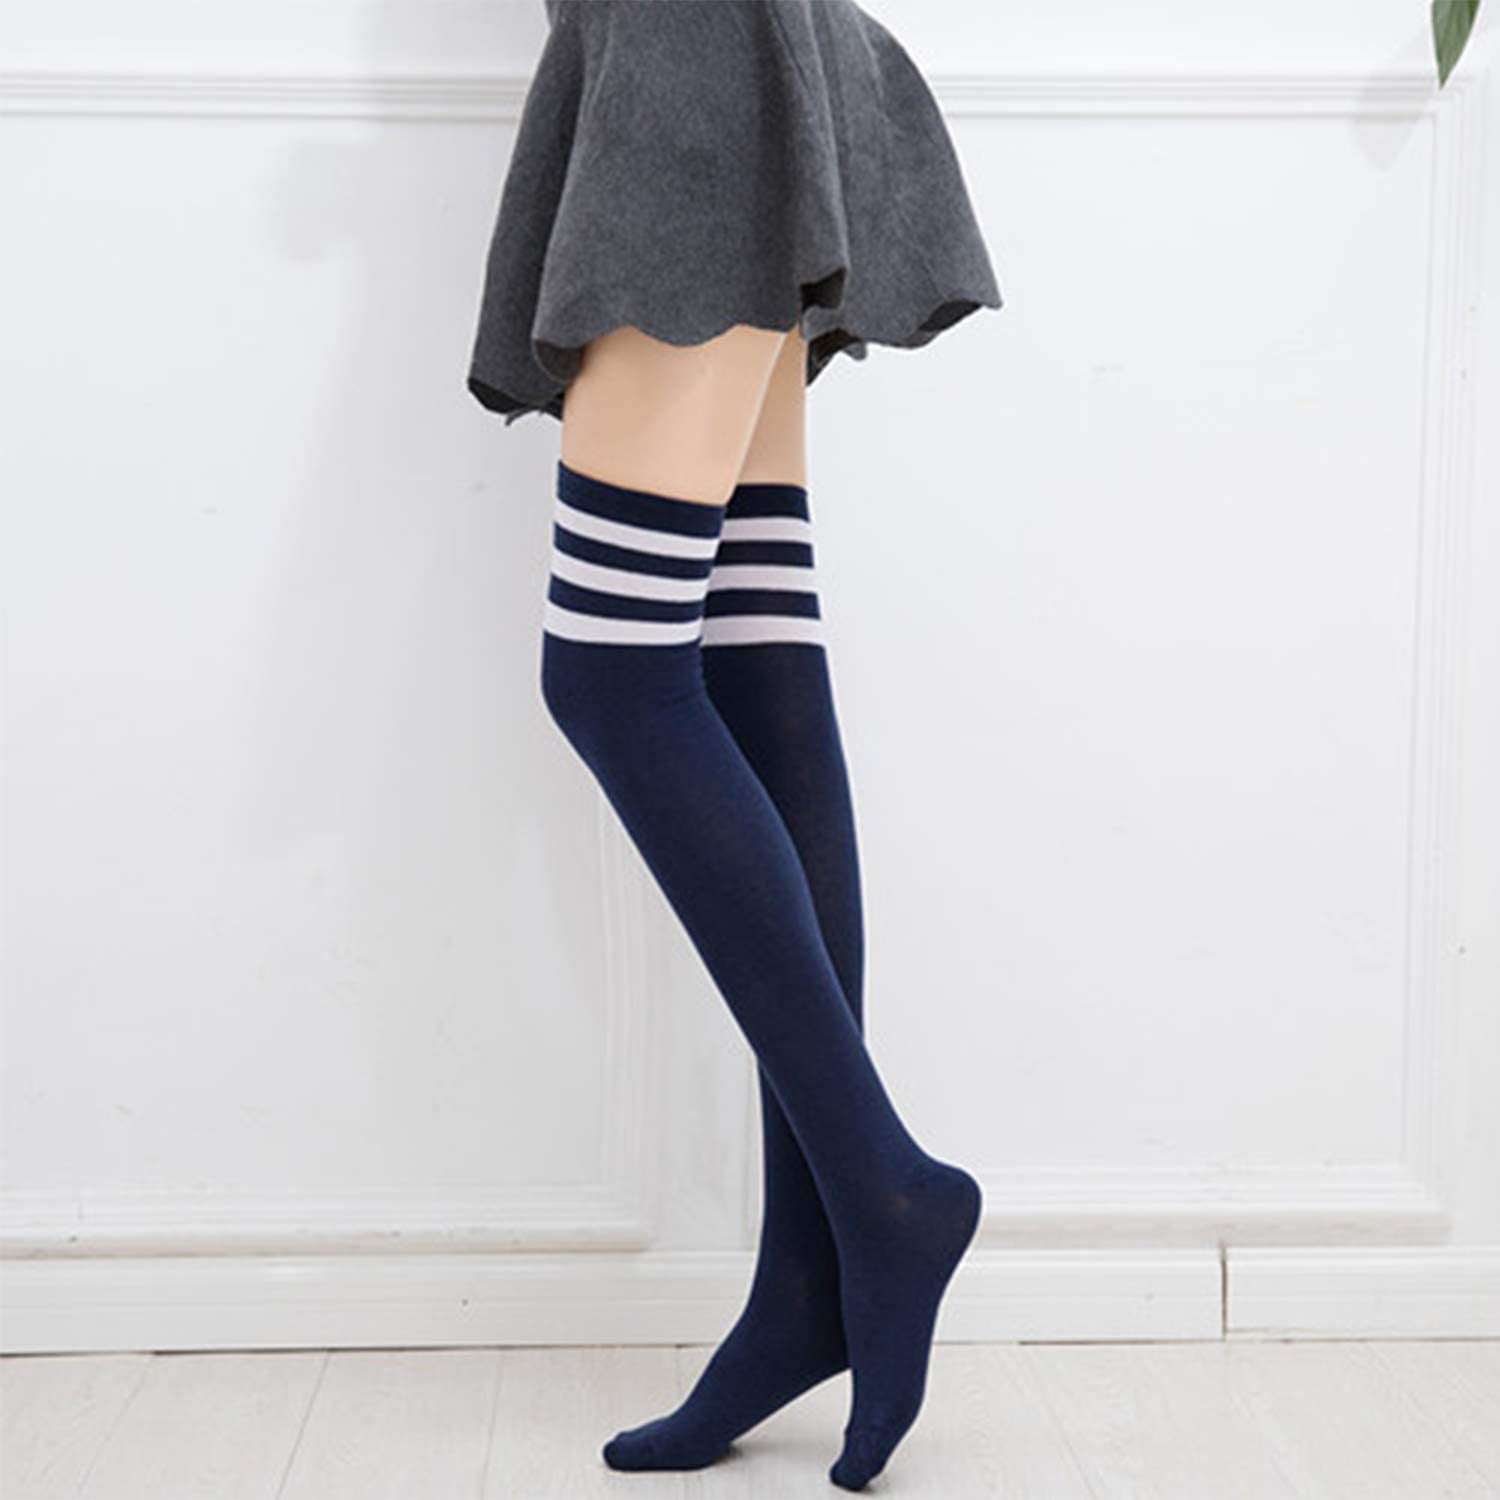 DRESHOW 6 Pairs High Thigh Socks Striped Over Knee Thin Tights Long Stocking for Women Leg Warmer 